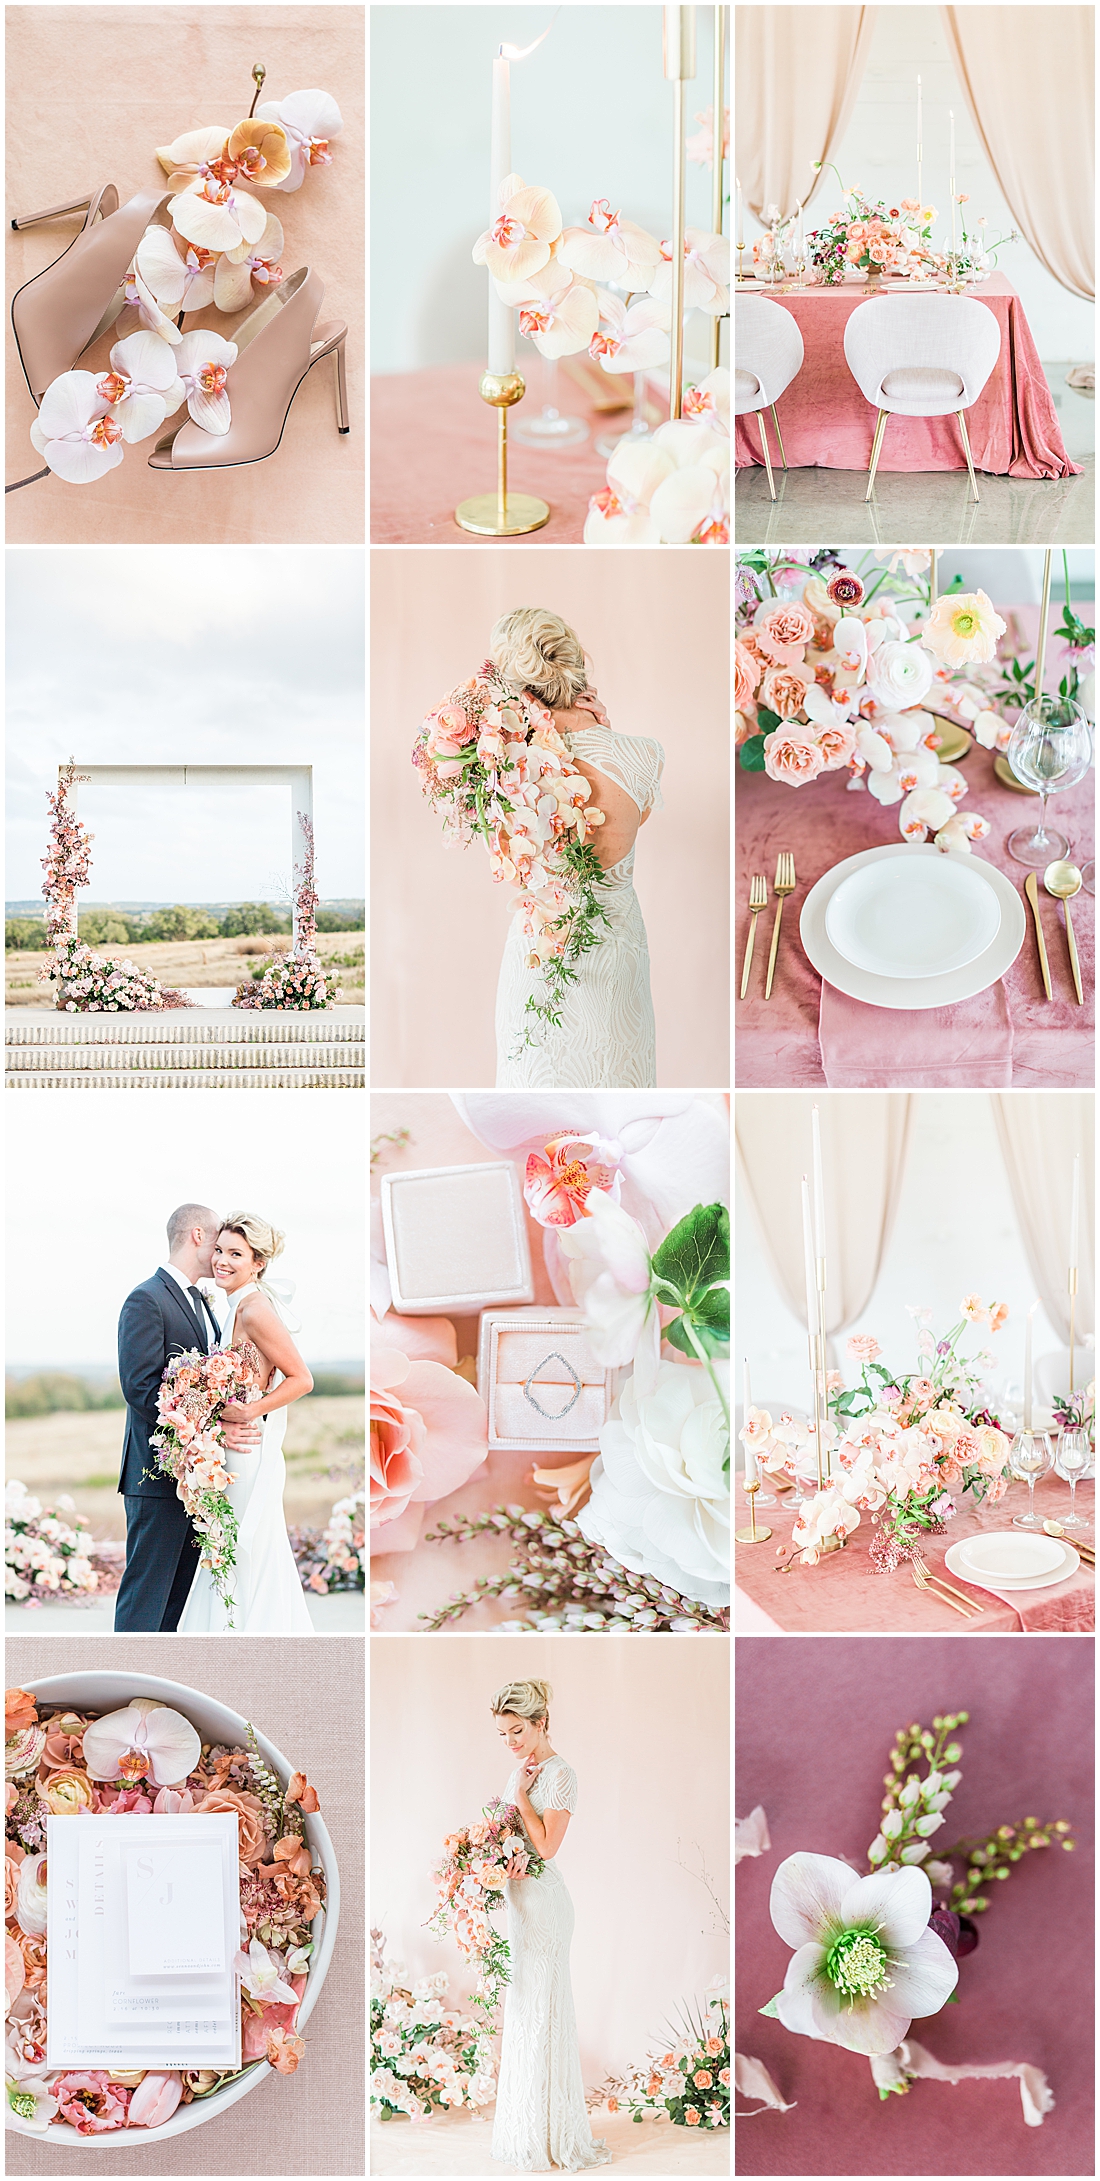 Blush mauve peach and coral wedding inspiration at Prospect House in Dripping Springs Texas wedding venue by Allison Jeffers Photography 0057